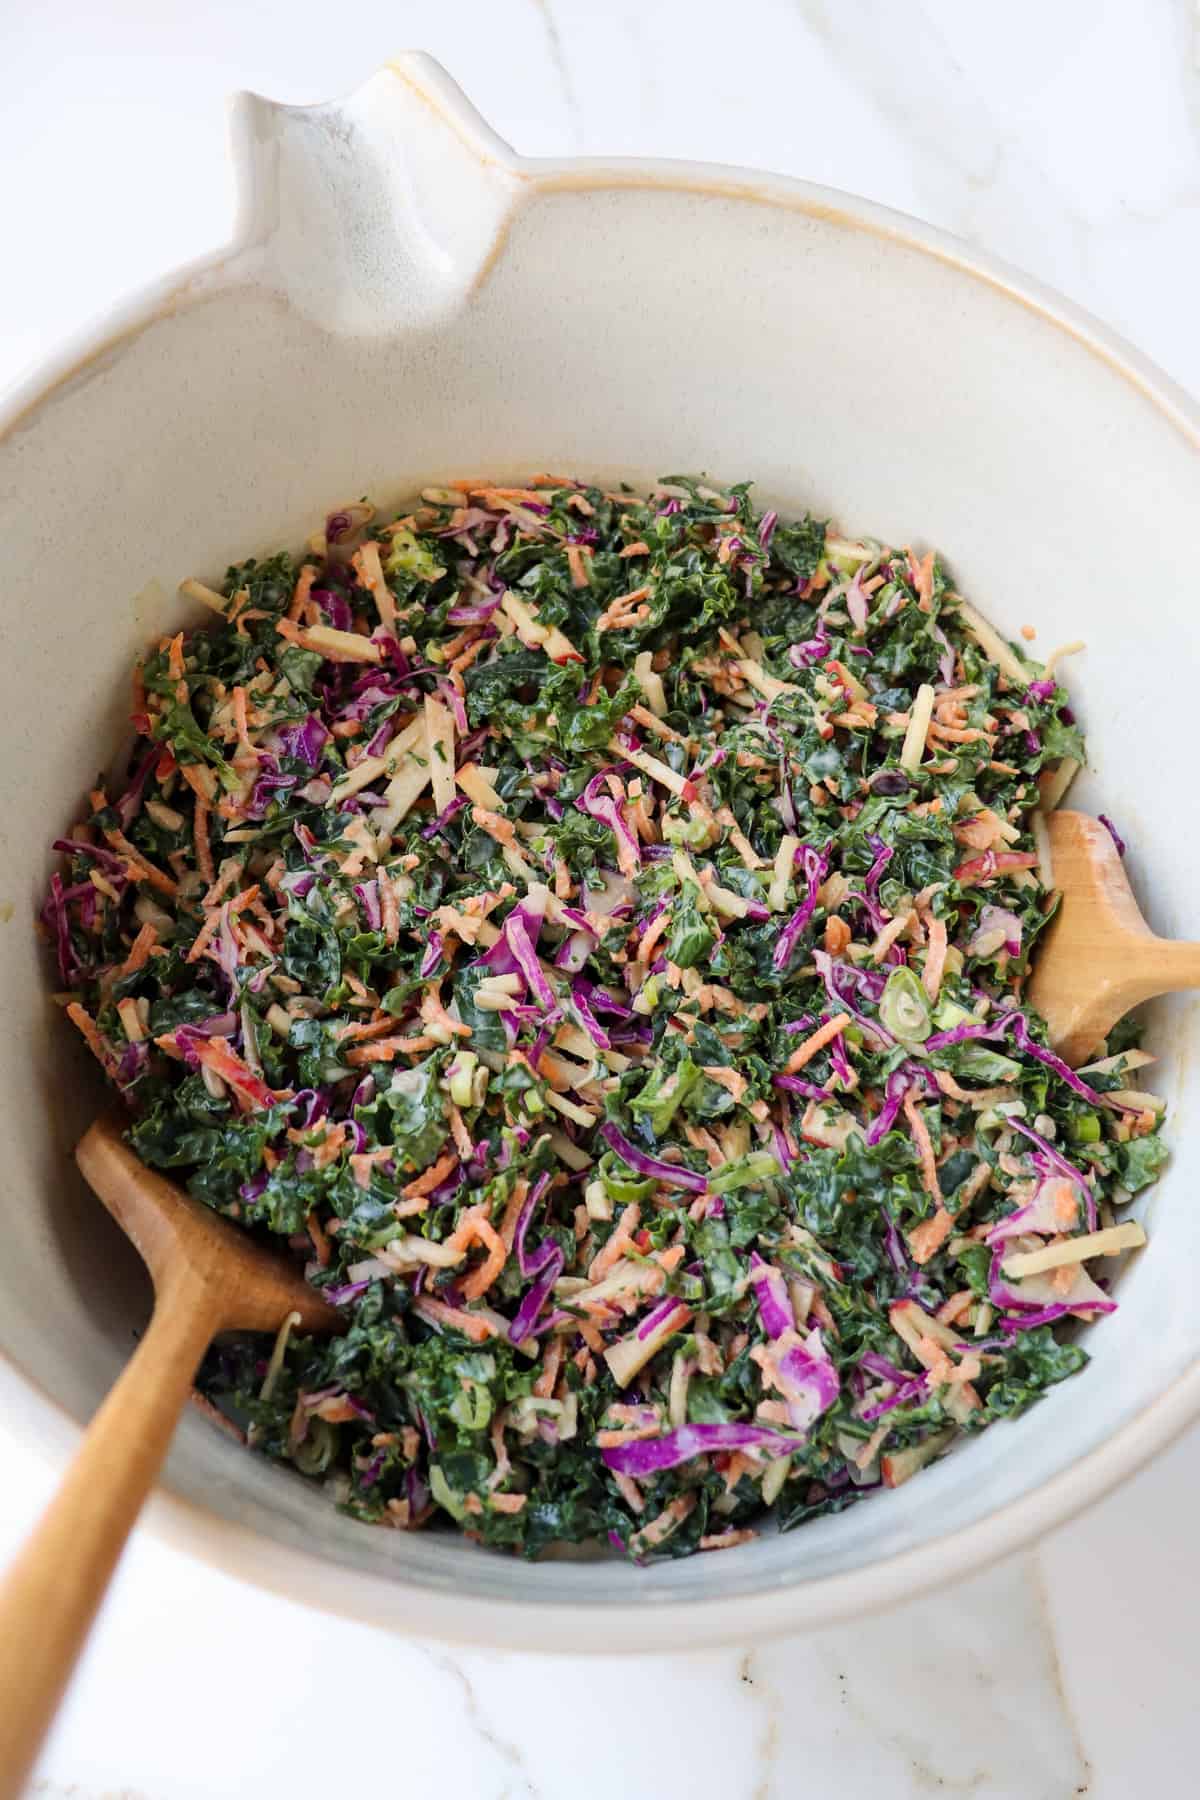 Kale slaw in a mixing bowl.